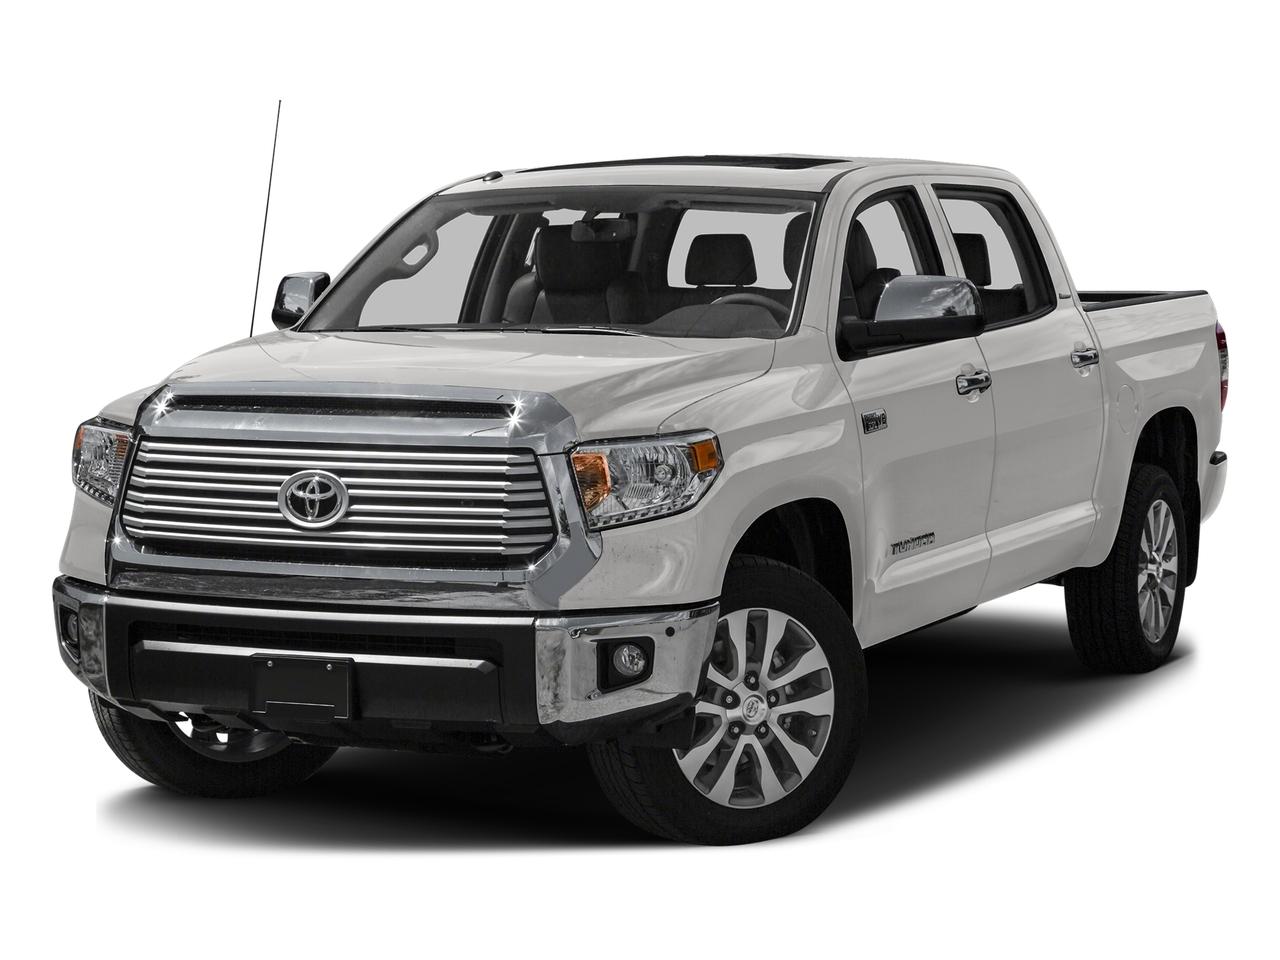 2016 Toyota Tundra 4WD Truck Vehicle Photo in Denison, TX 75020